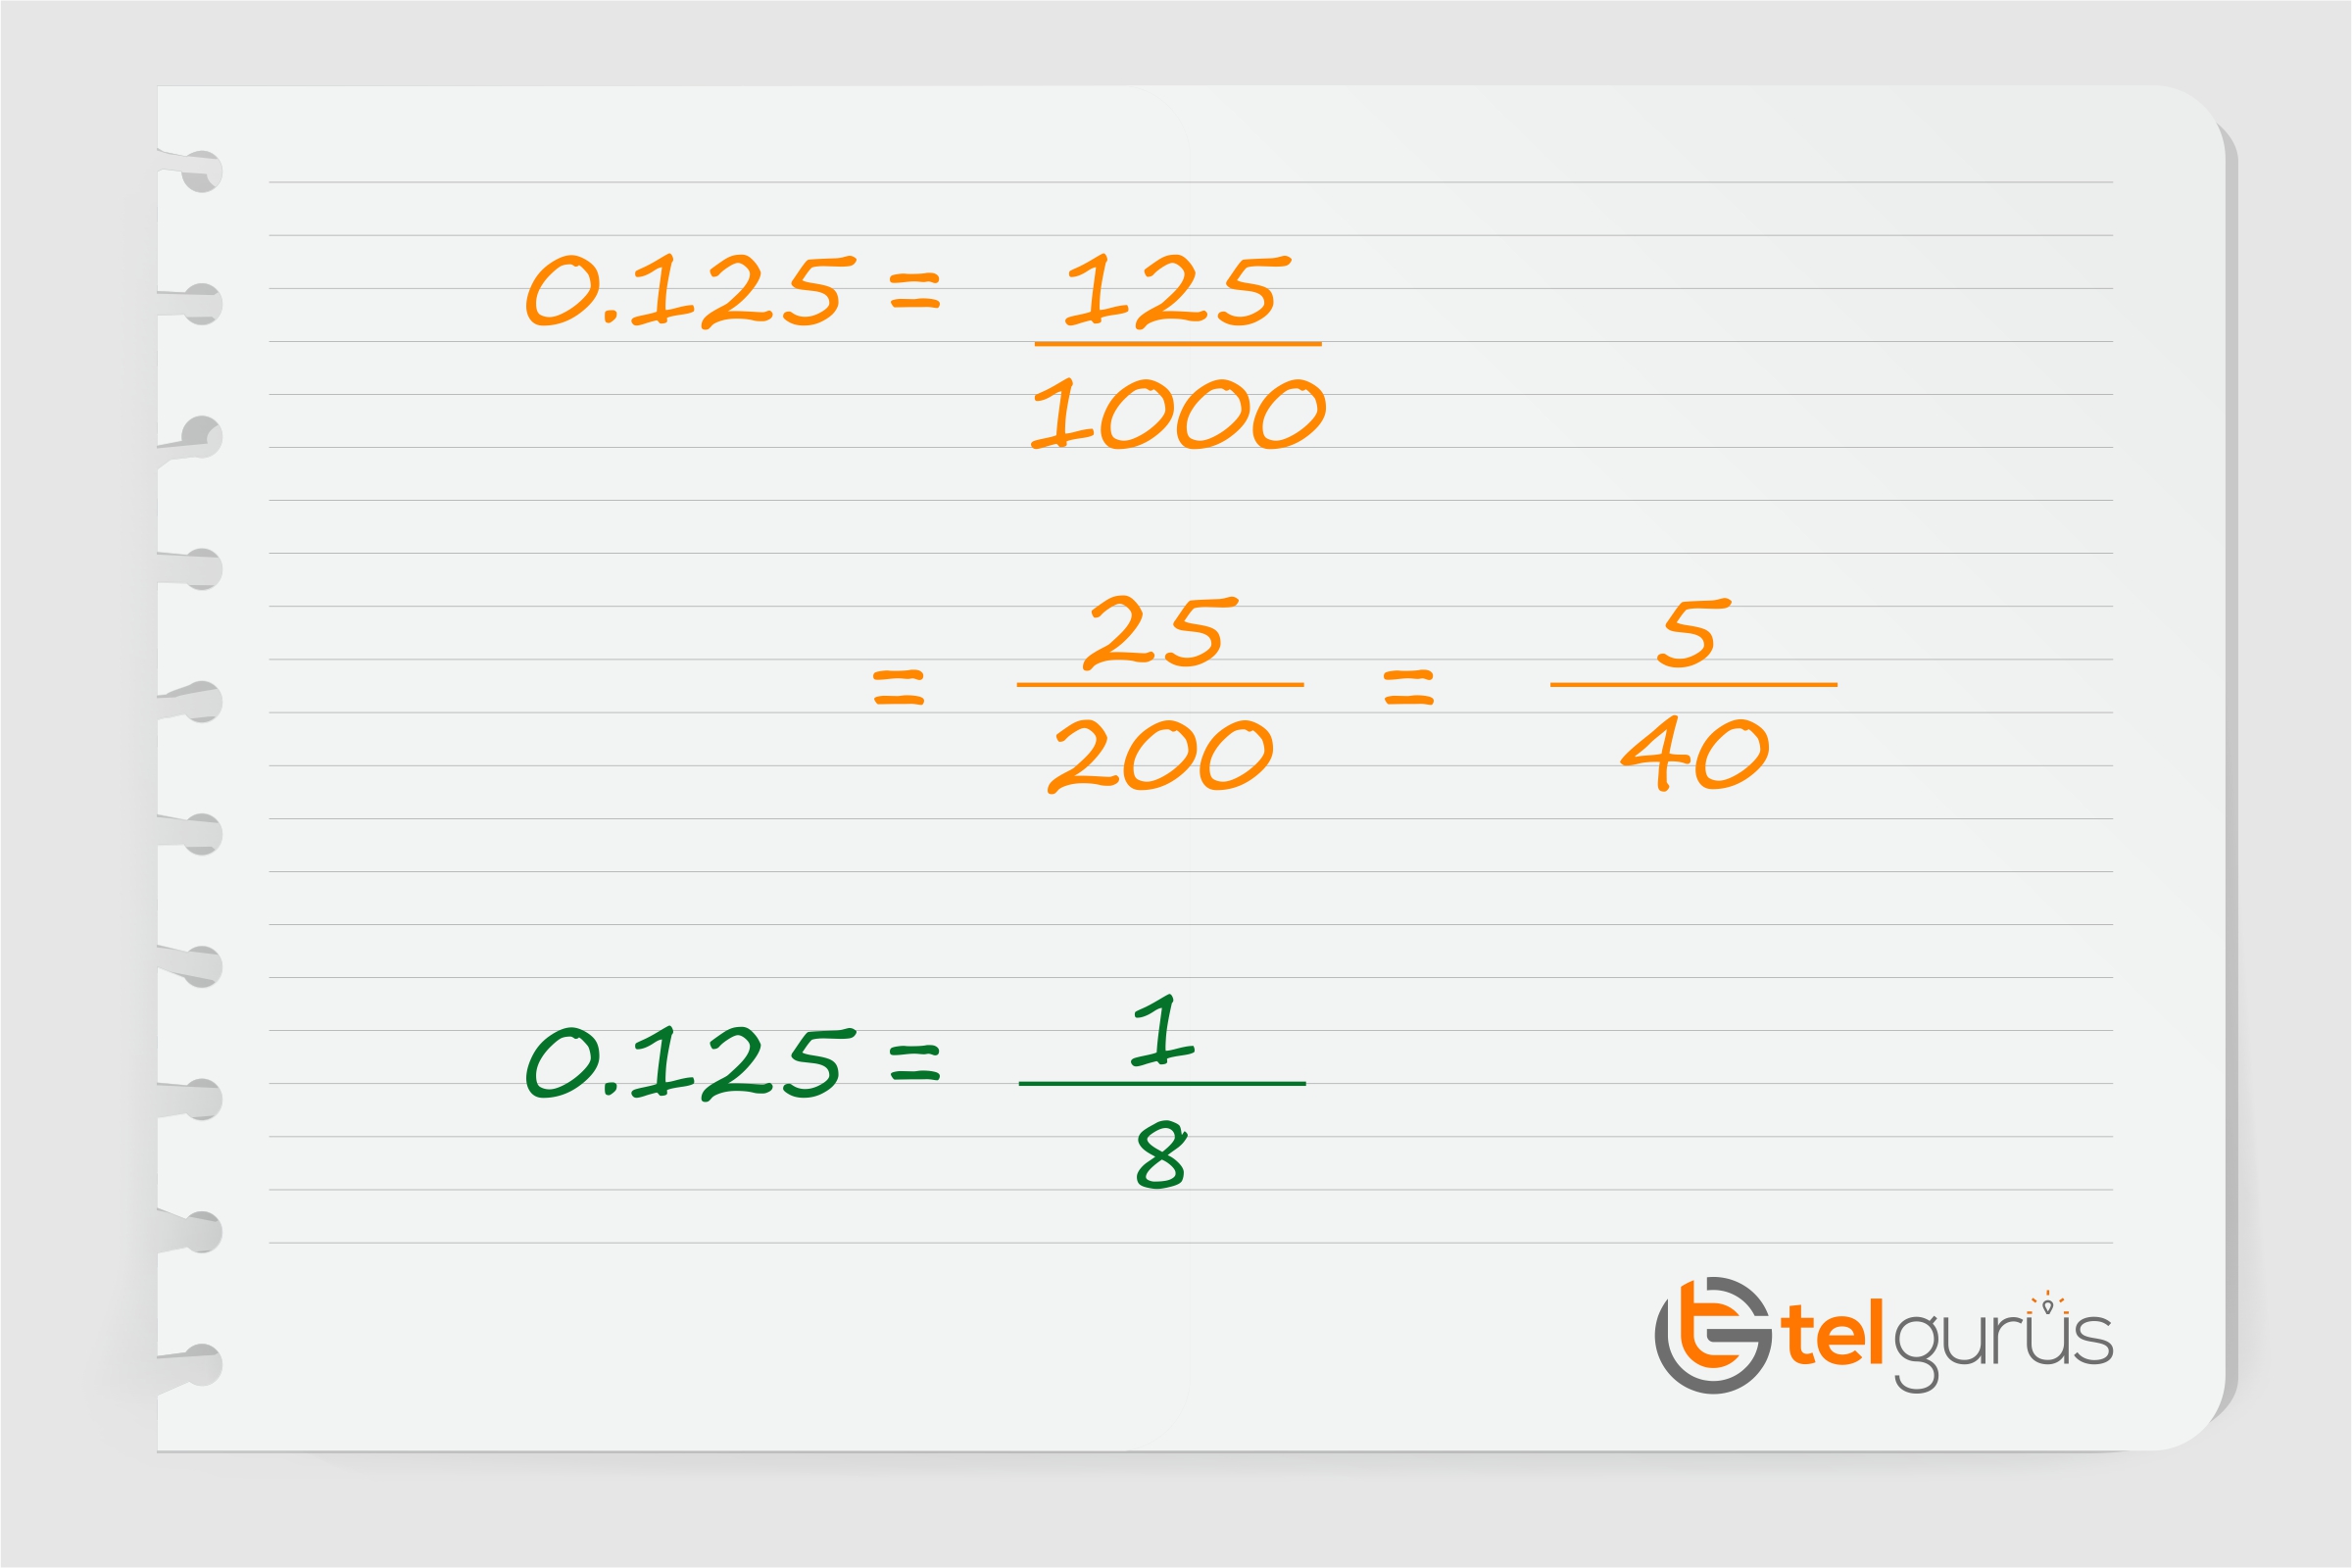 How would you convert the decimal 0.125 into a fraction in its simplest form?